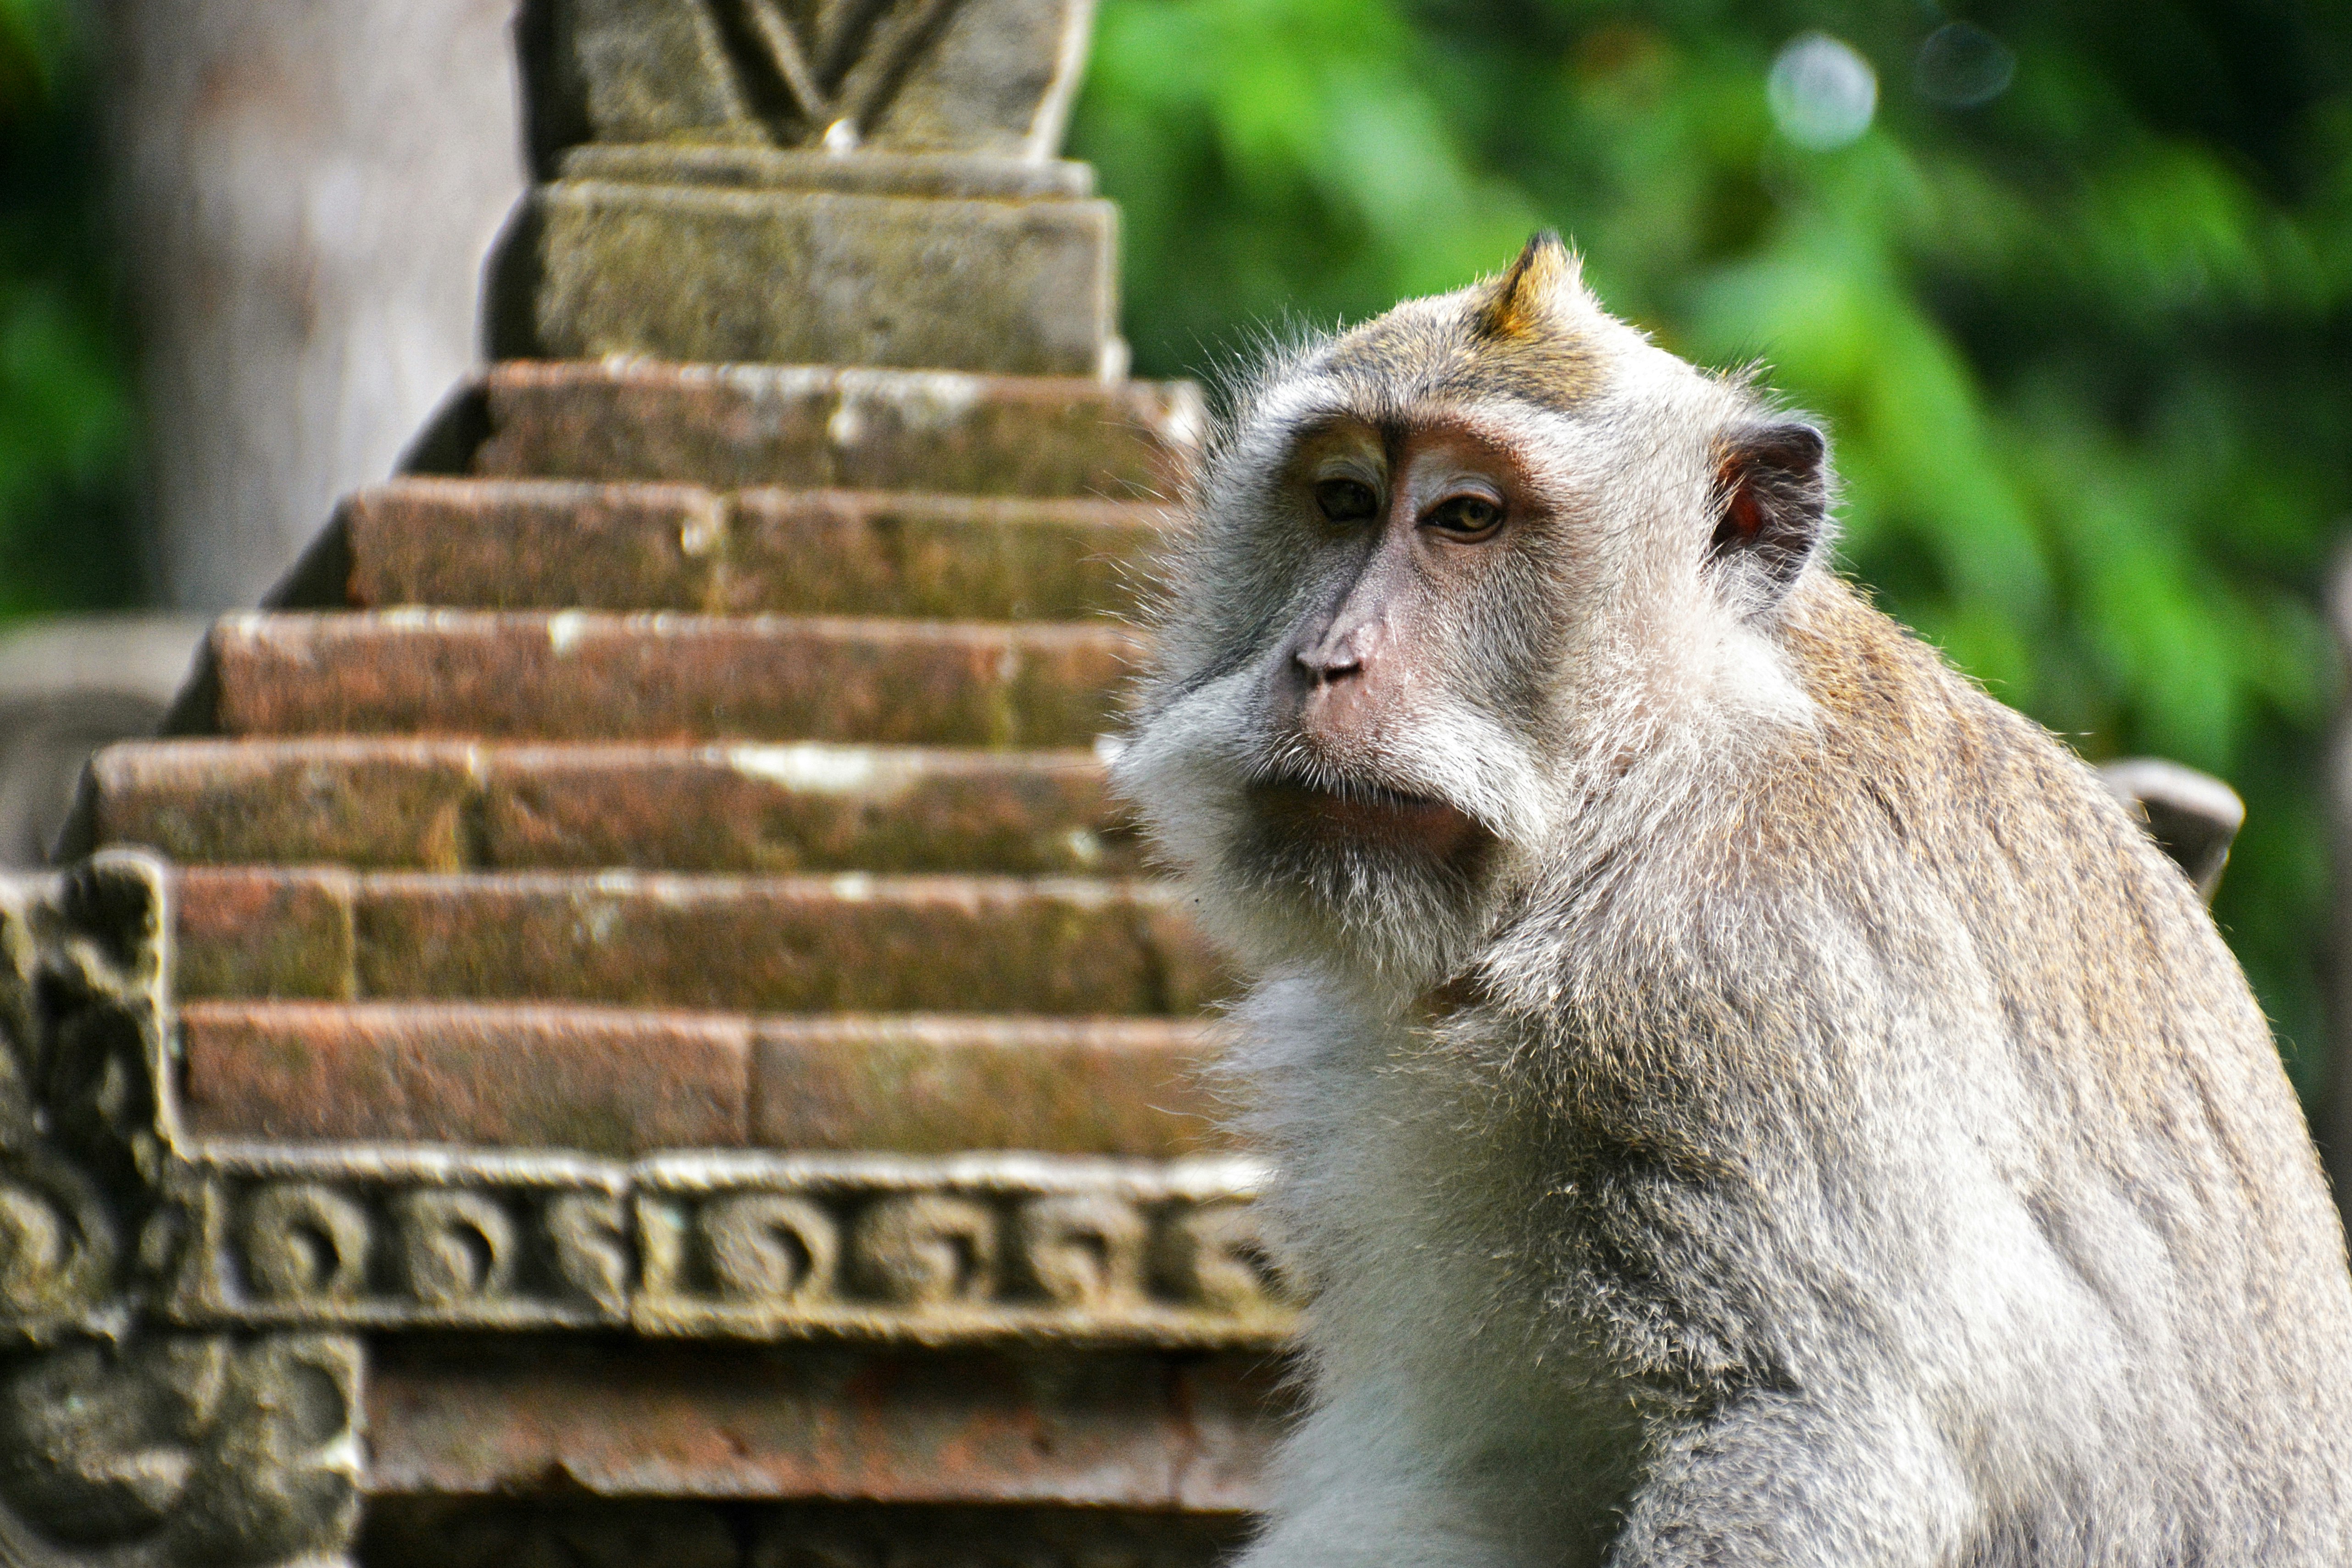 gray and white monkey sitting on gray concrete stairs during daytime